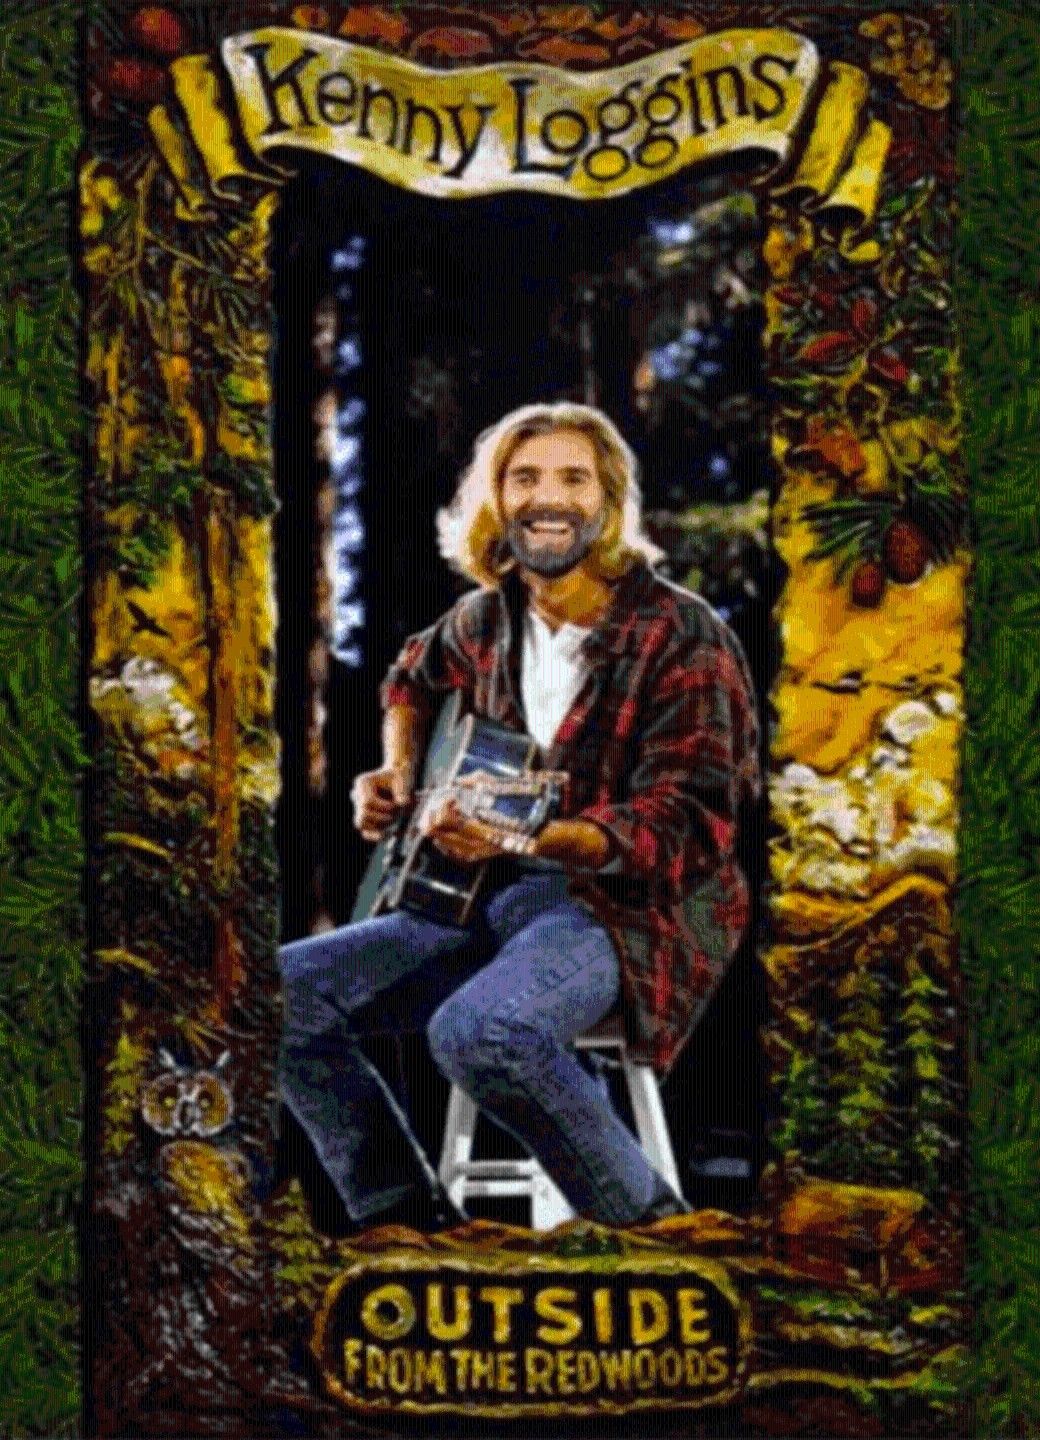 Kenny Loggins – Outside from the Redwoods